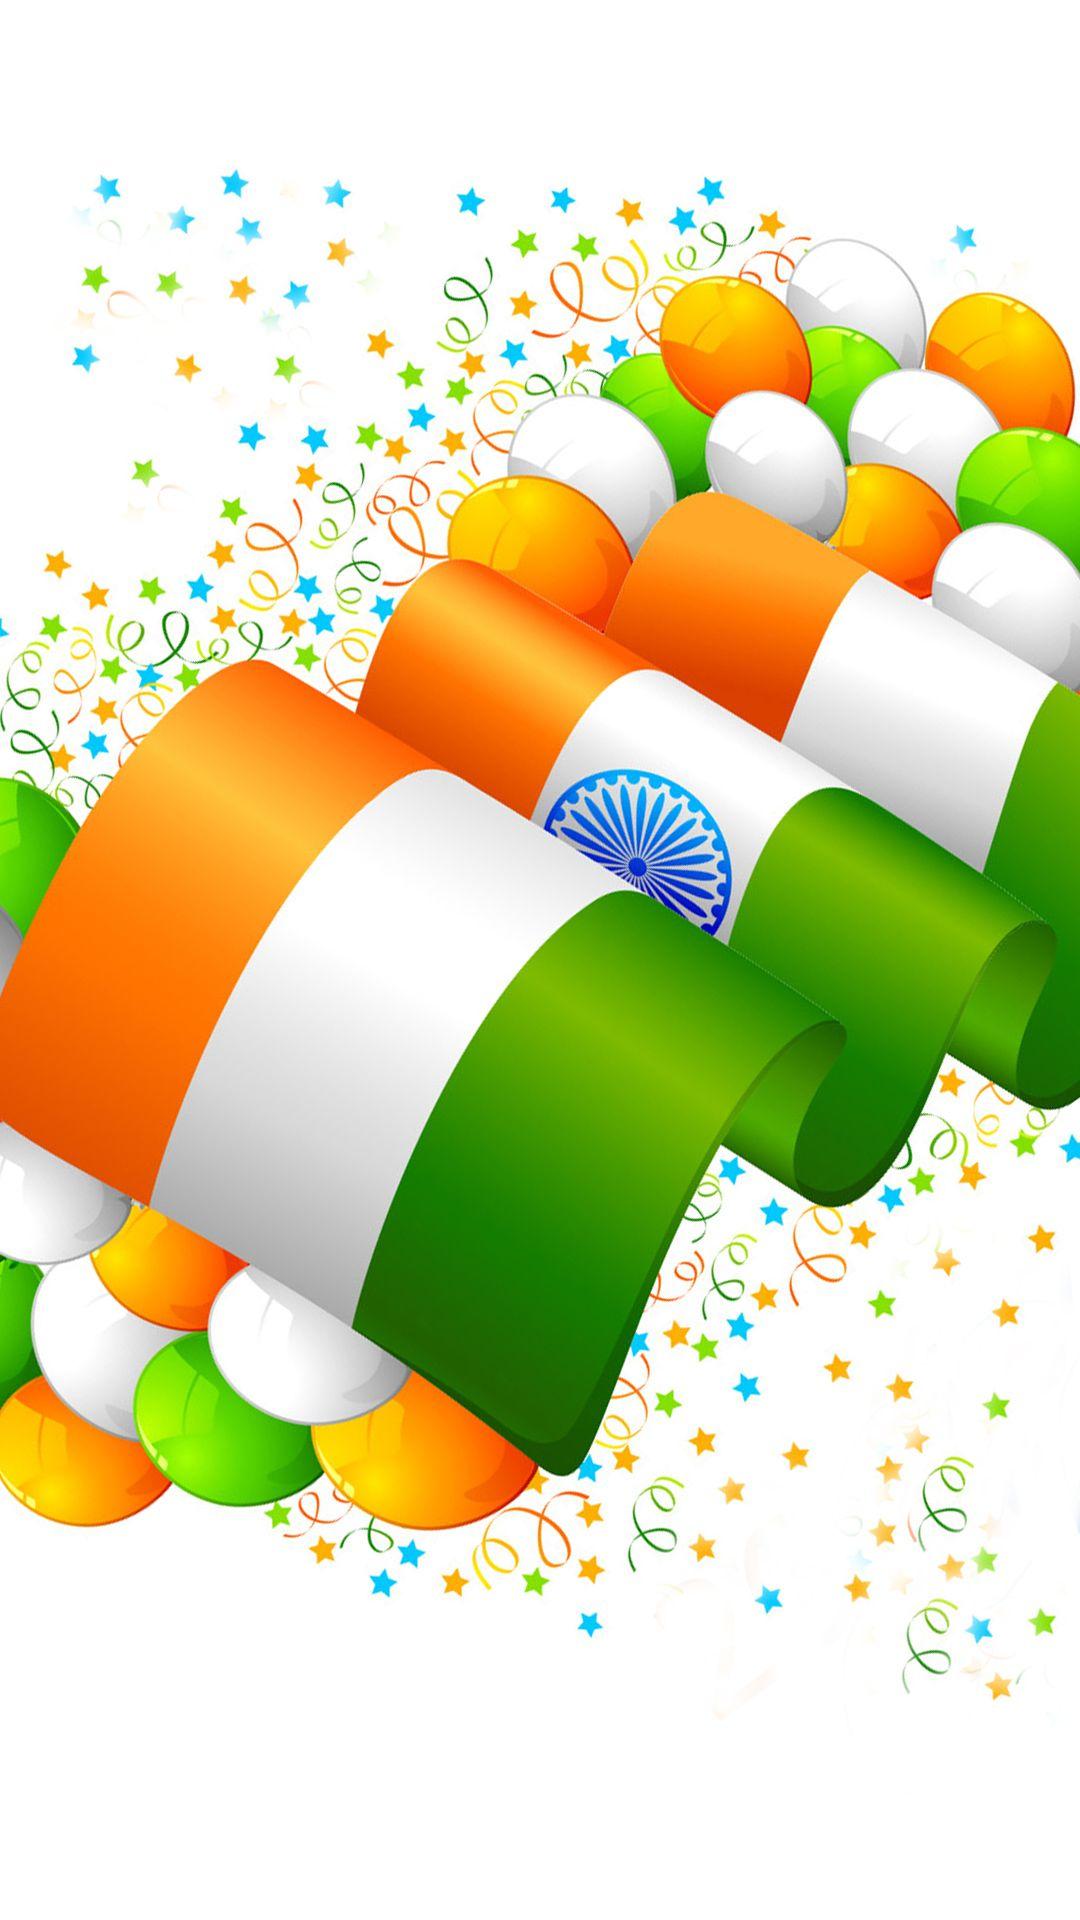 India Flag for Mobile Phone Wallpaper 13 of 17 Decoration Wallpaper. Wallpaper Download. High Resolution Wallpaper